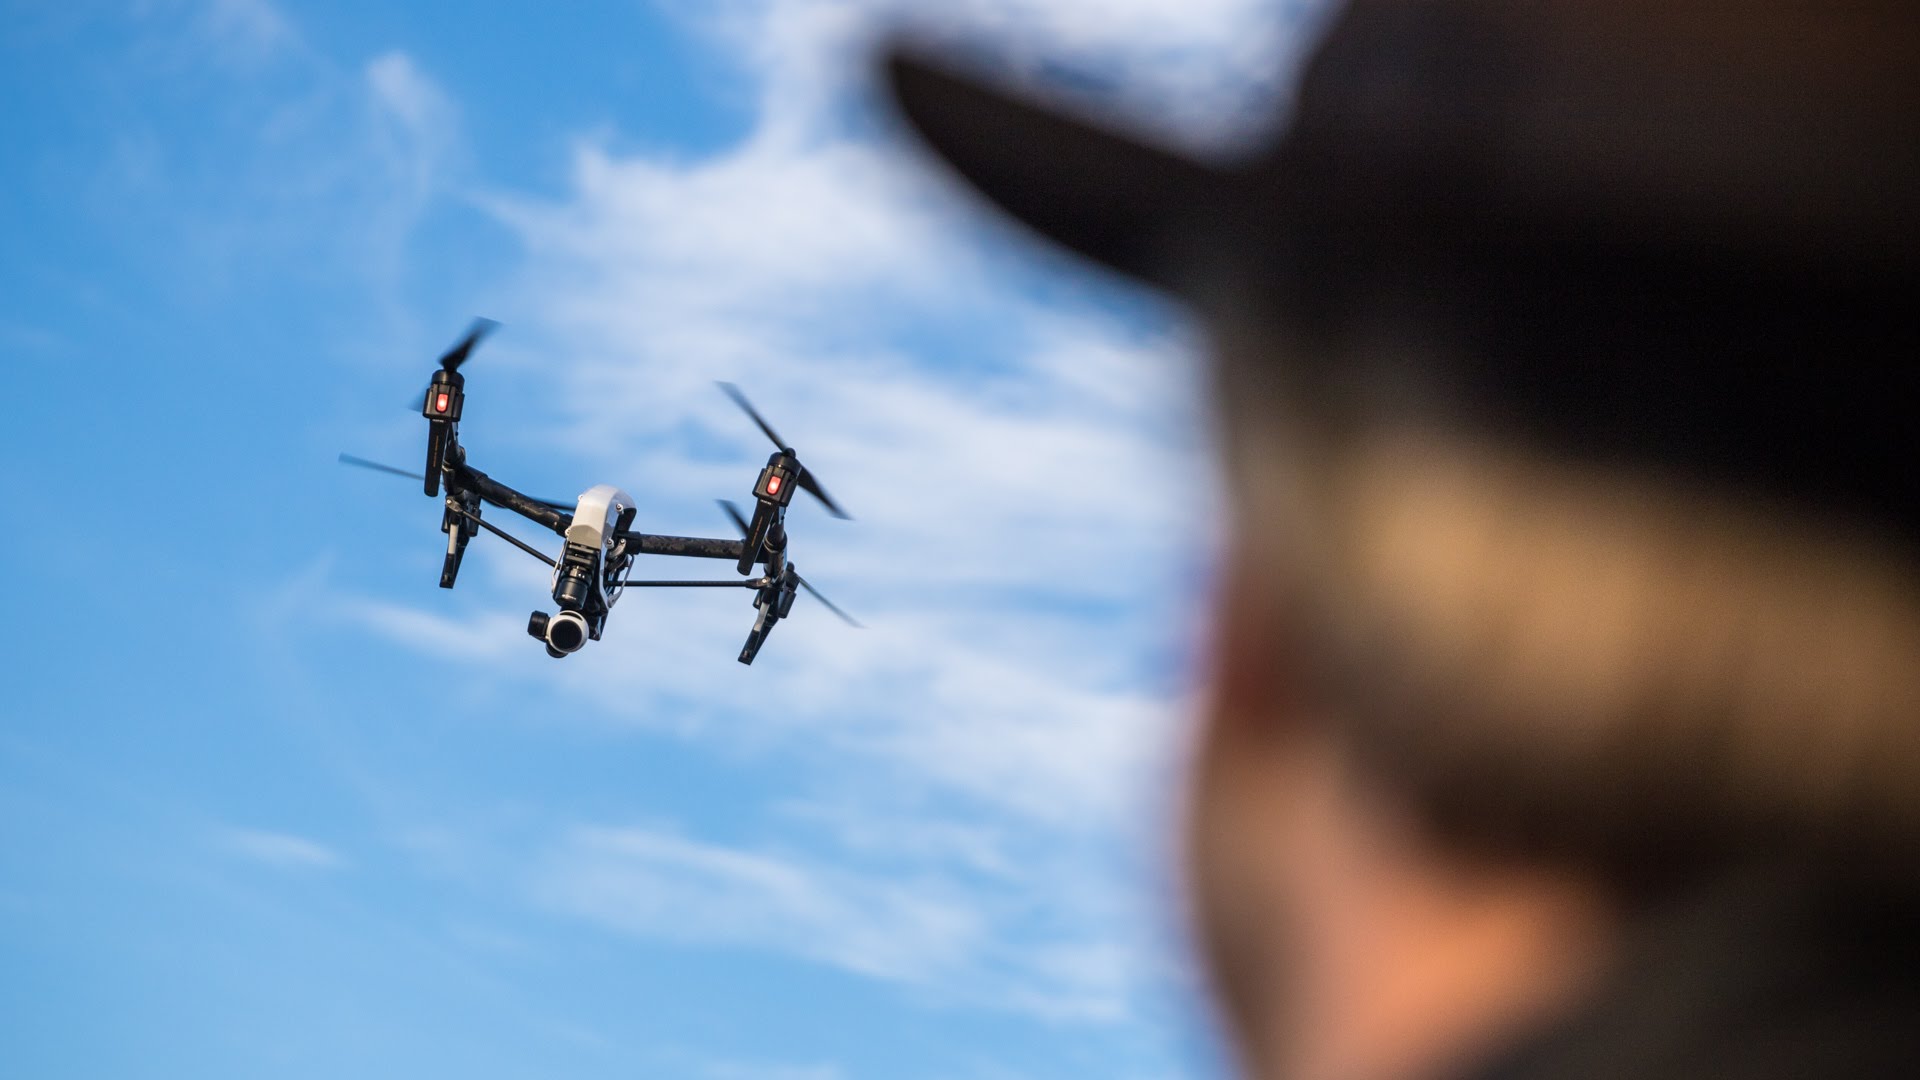 Flying the DJI Inspire 1 Quadcopter with Adam Savage